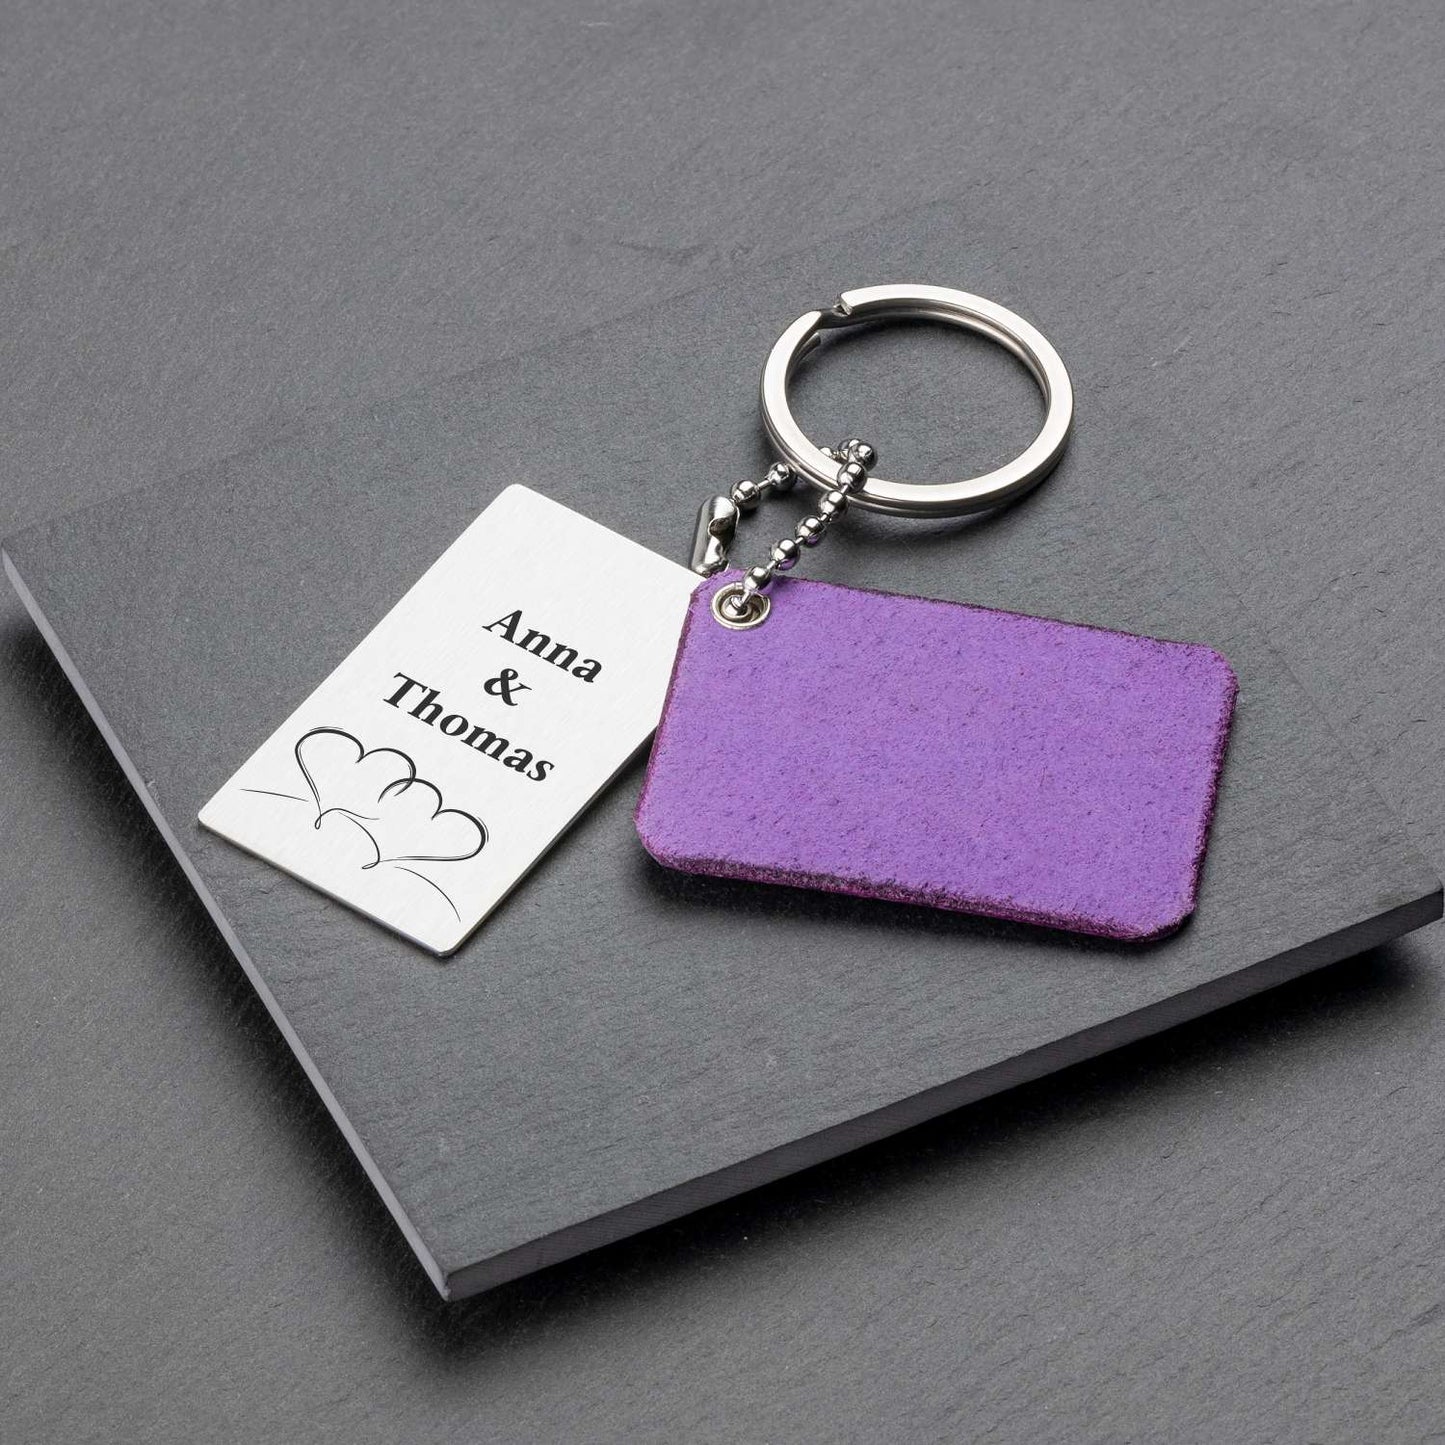 Personal Photo Engraved Keyring in Purple Leather - seQua.Shop